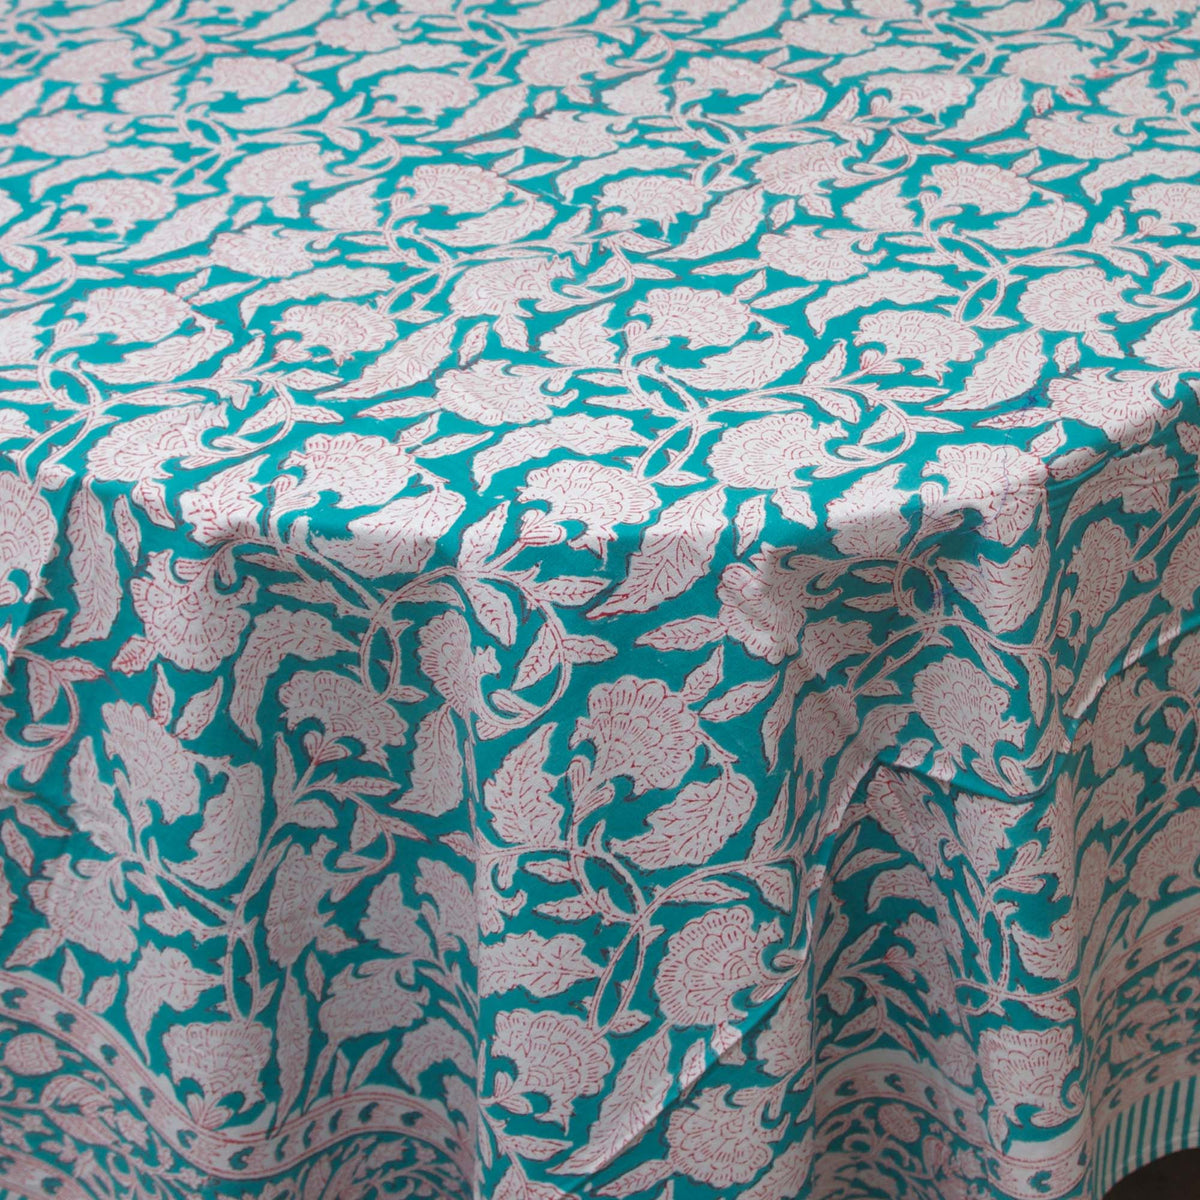 Turquoise Floral Garden Block Printed Rectangle Tablecloth Table Cover